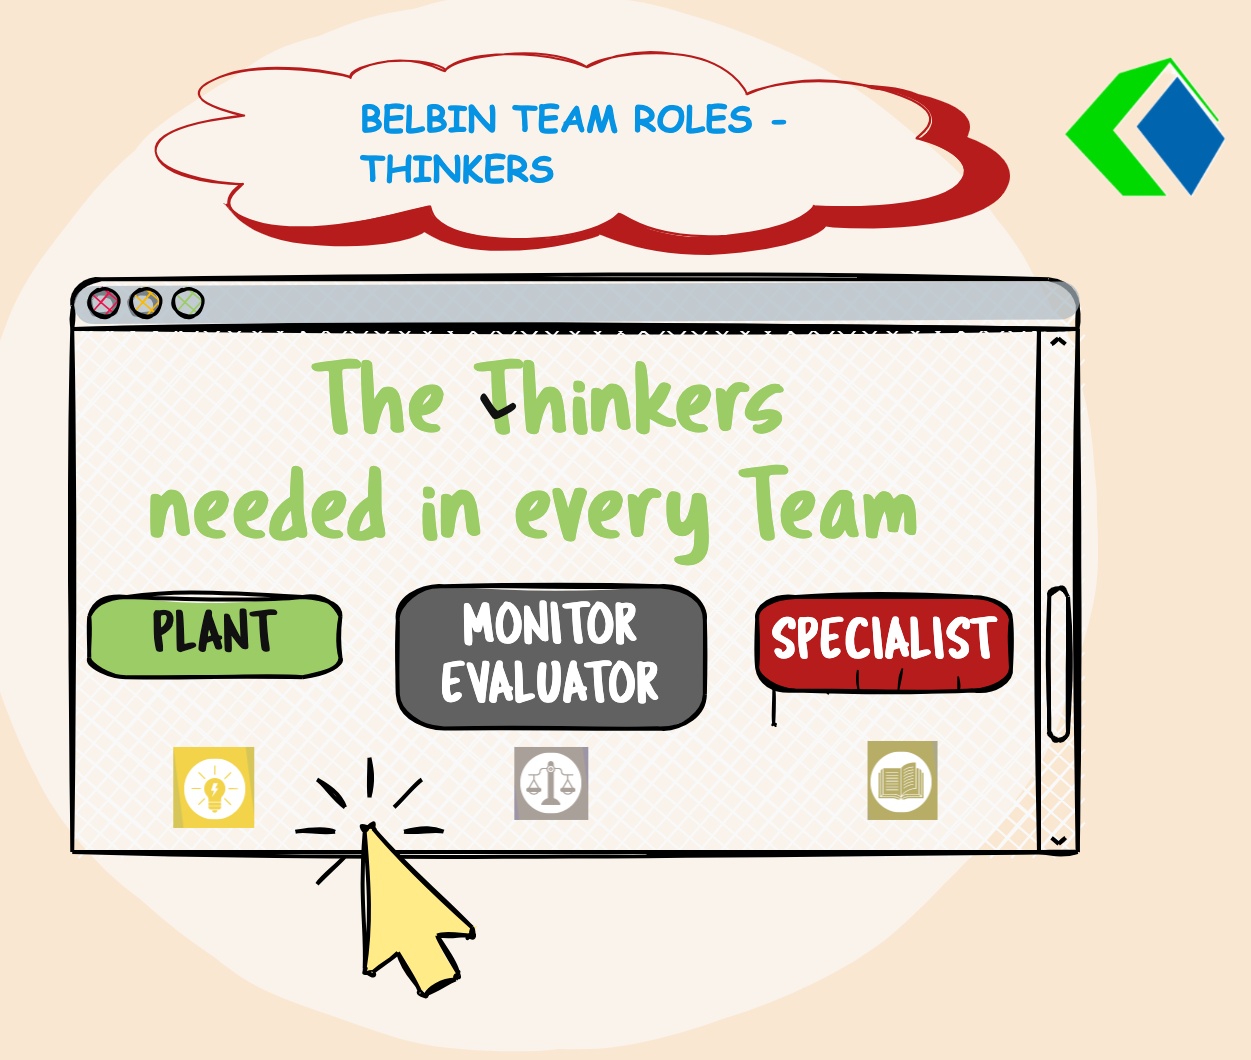 Belbin Singapore Thinkers team roles